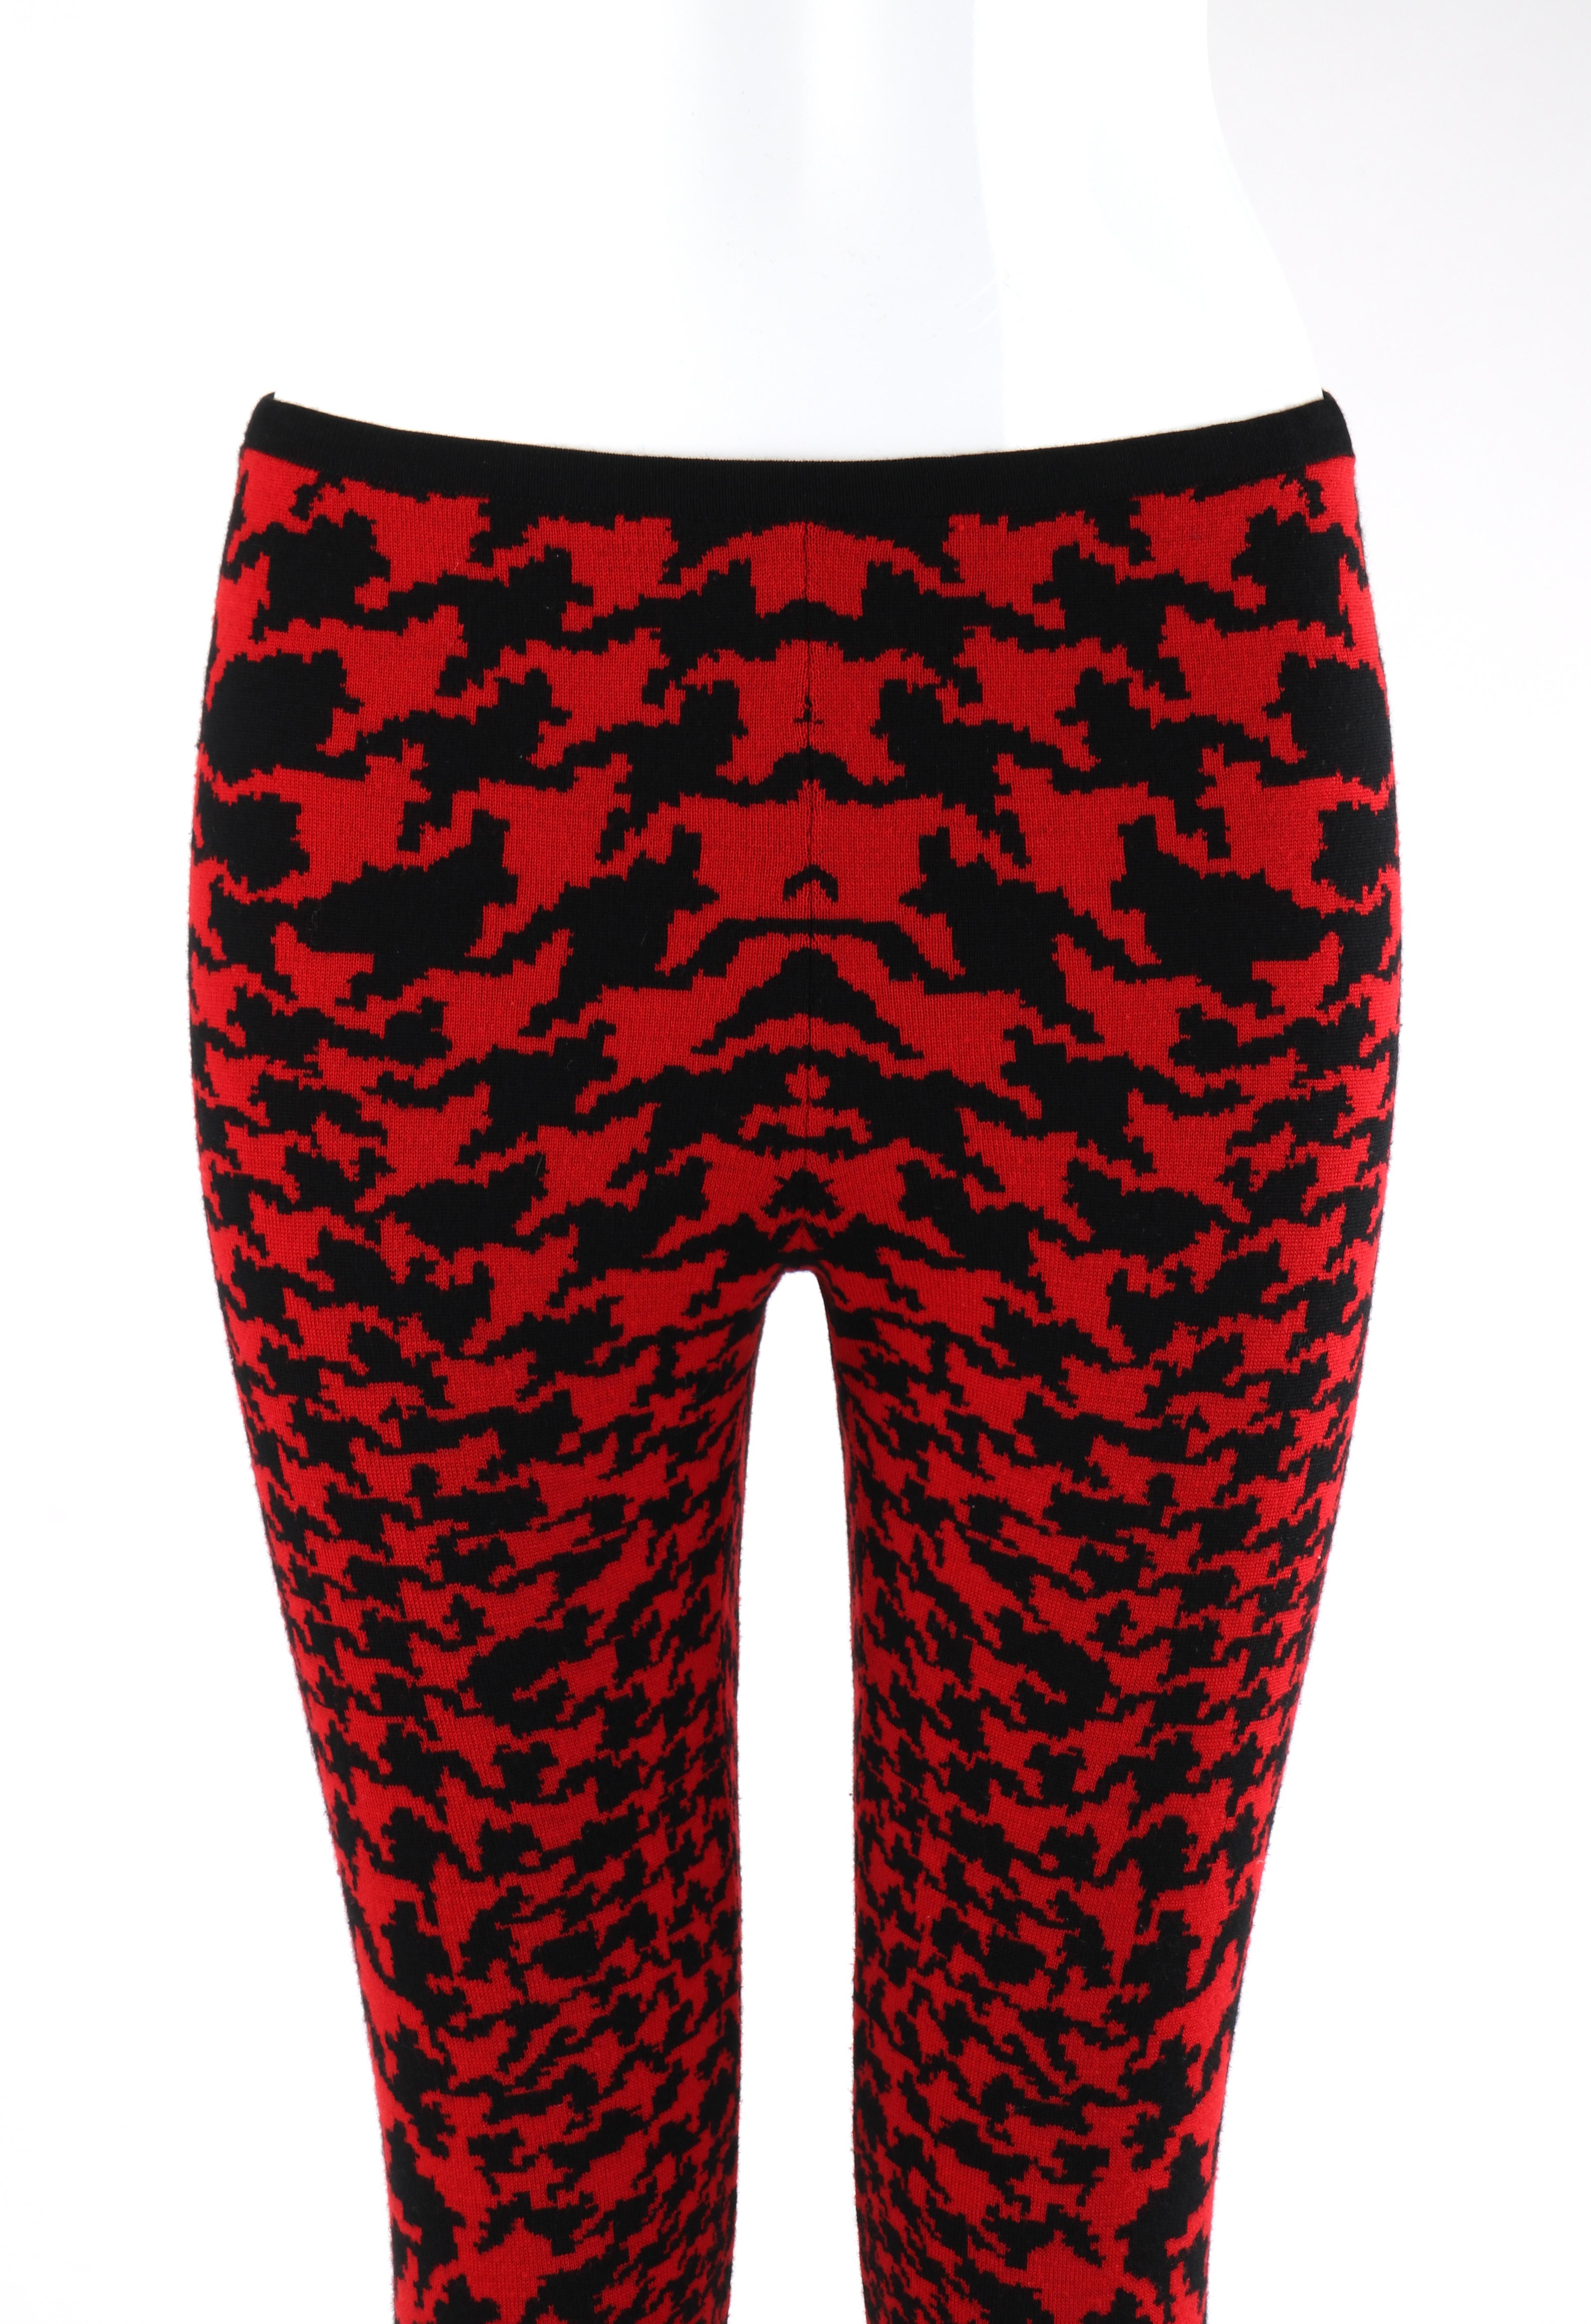 ALEXANDER McQUEEN A/W 2009 “The Horn Of Plenty” Houndstooth Knit Red Leggings
 
Brand / Manufacturer: Alexander McQueen
Collection: A/W 2009 “The Horn Of Plenty”
Designer: Alexander McQueen
Style: Legging
Color(s): Red and black
Lined: No
Marked